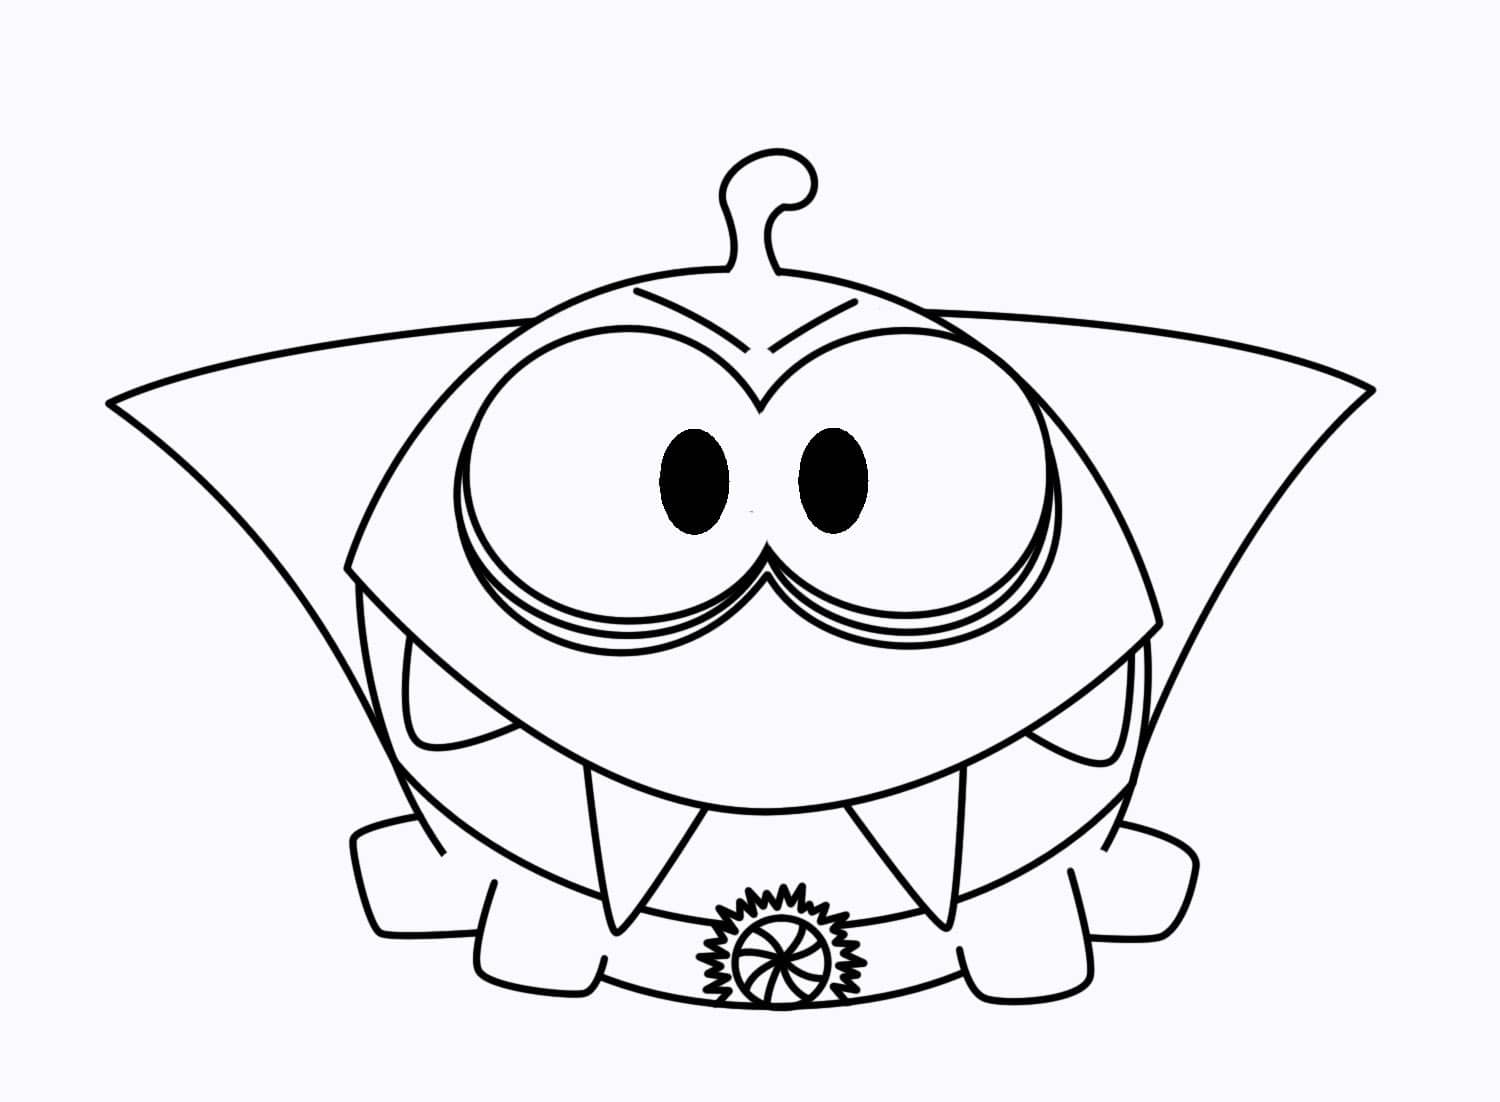 Om Nom 10 Coloring Page - Free Printable Coloring Pages for Kids